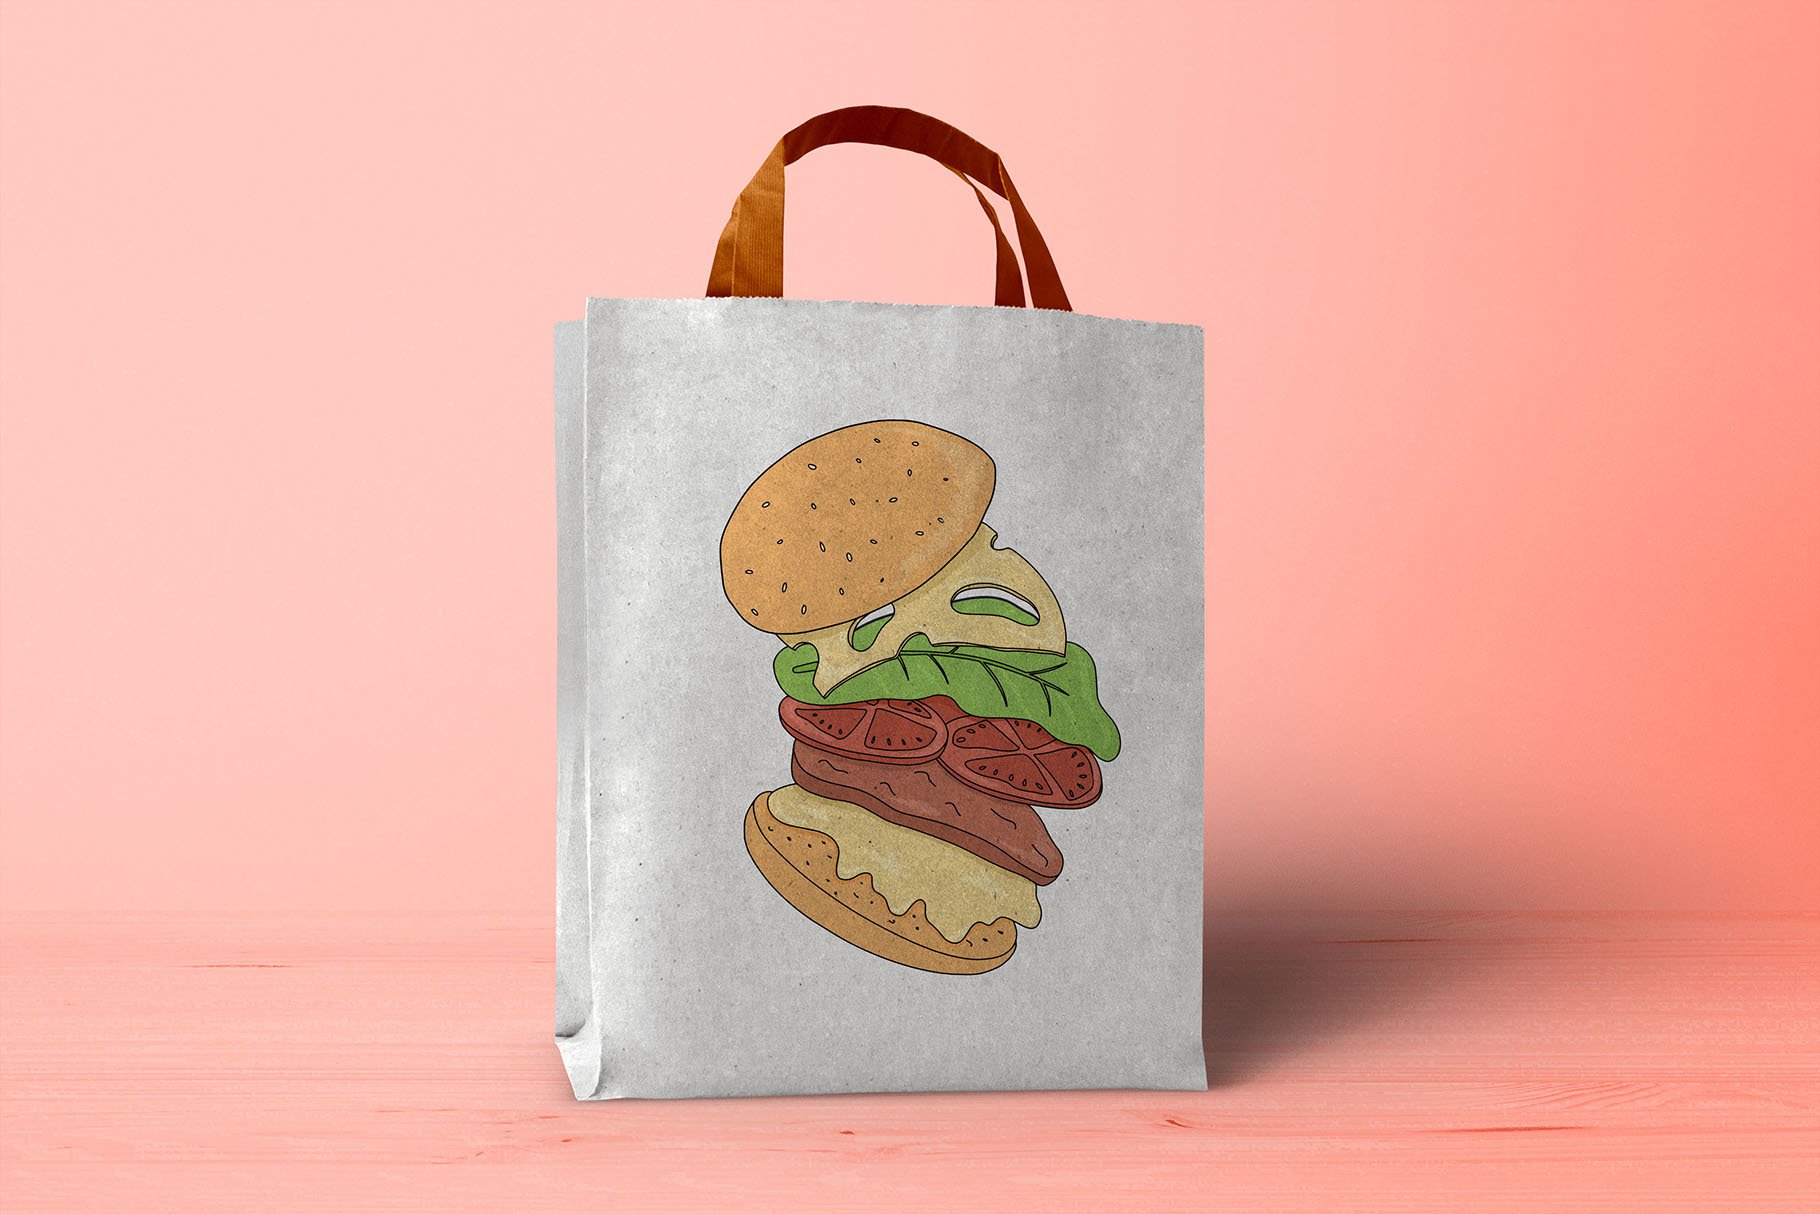 Burger print on the package.